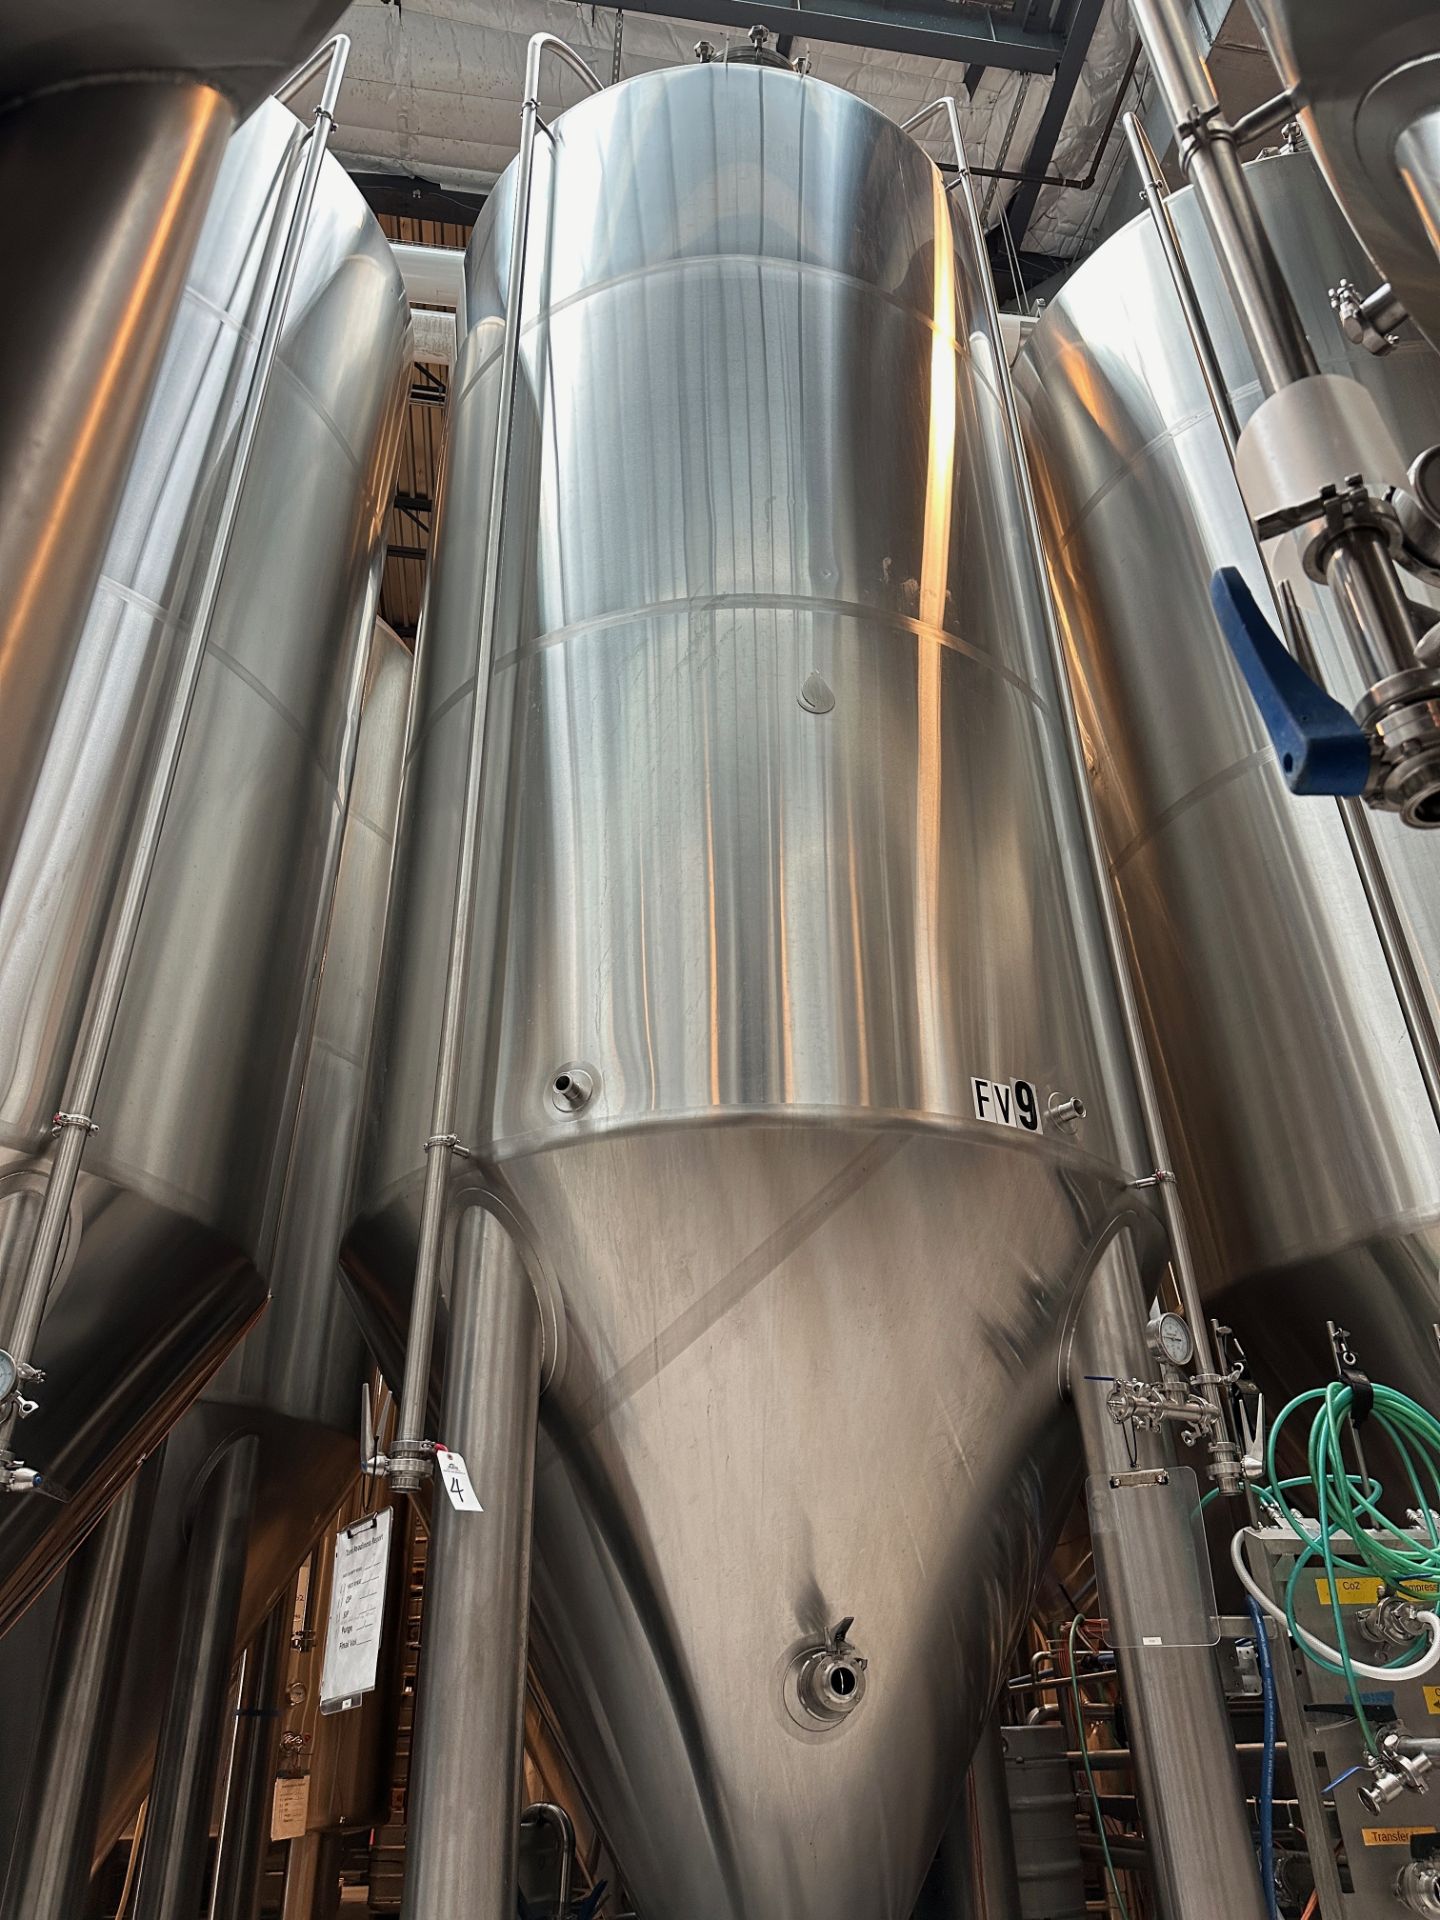 Complete 40 BBL Microbrewery - 40 BBL Deutsche 4-Vessel Brewhouse, Tanks, Can Line - See Description - Image 28 of 335